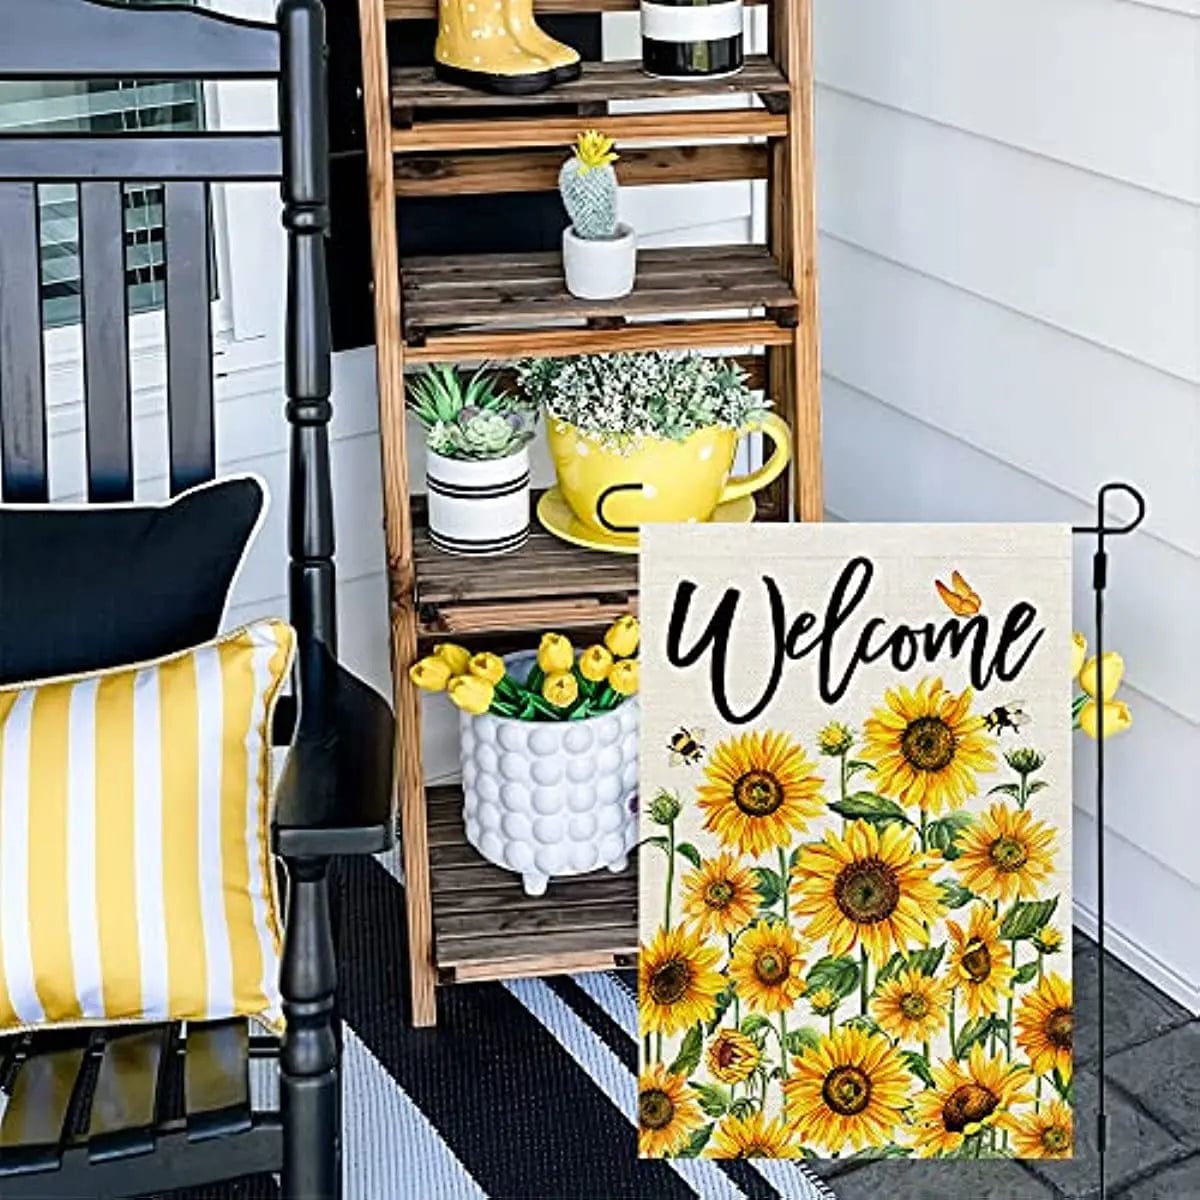 summer-floral-garden-flag-sunflowers-12x18-inch-double-sided-for-outside-welcome-burlap-small-yard-seasonal-decoration